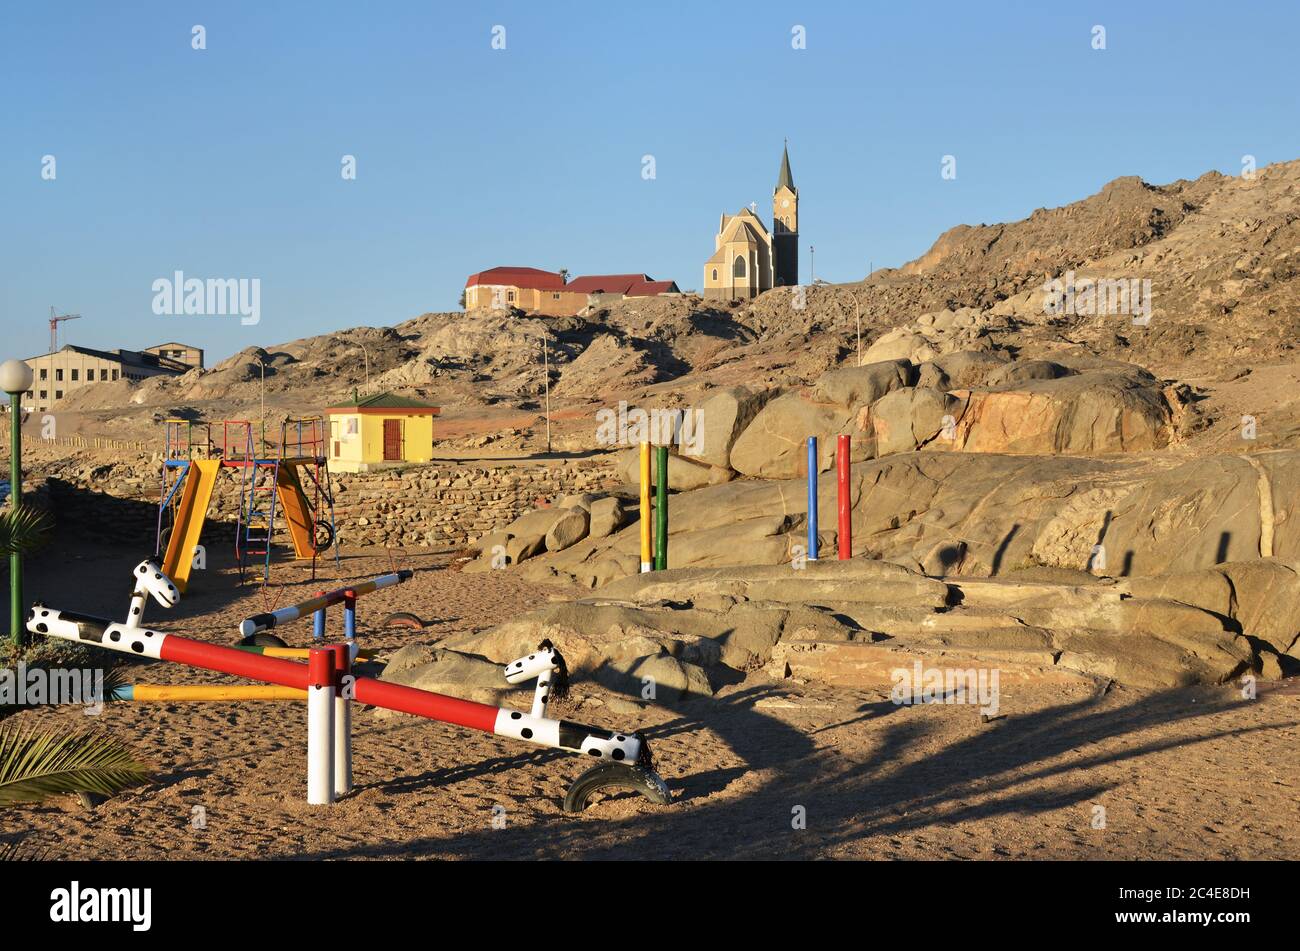 Public playground in the city of Luderitz. Bright colorful empty children's playground in the rock yard of a city district. Felsenkirche church on bac Stock Photo